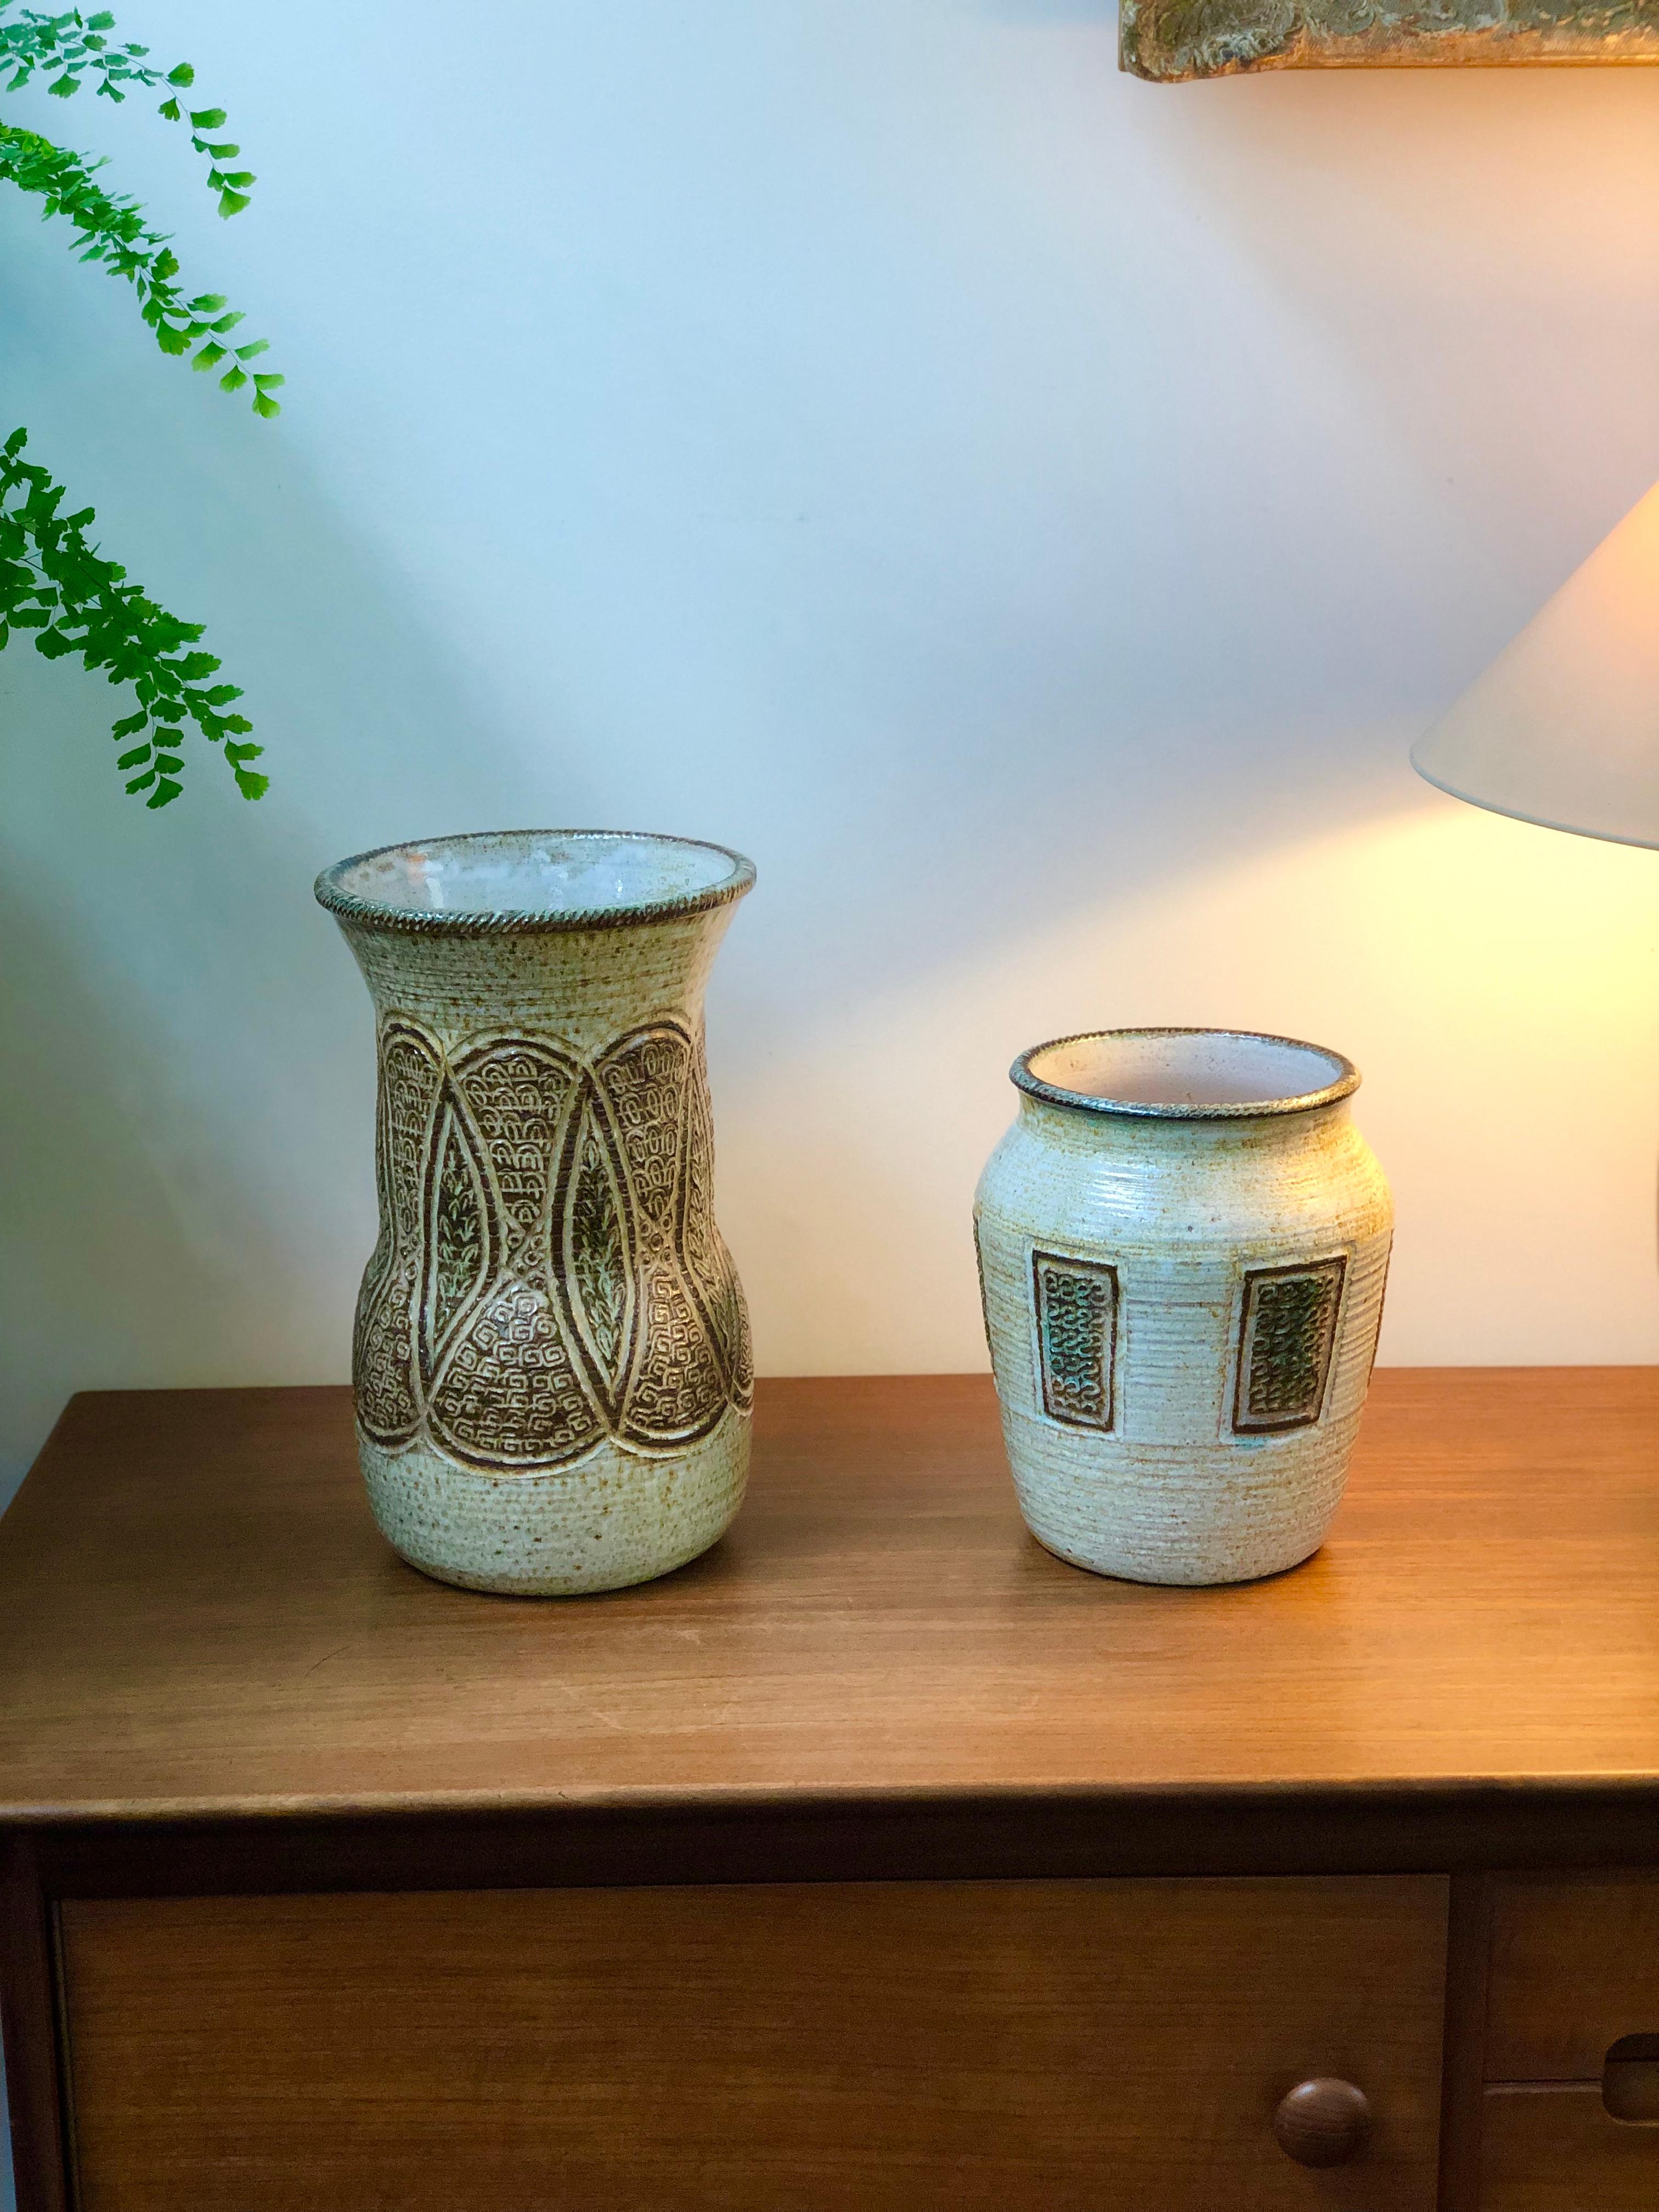 Midcentury ceramic glazed vase (circa 1960s) with French Japonisme design. In the late 18th century in France, there was an obsession with all things Japanese. This inspired designers and manufacturers of the decorative arts to incorporate Japanese